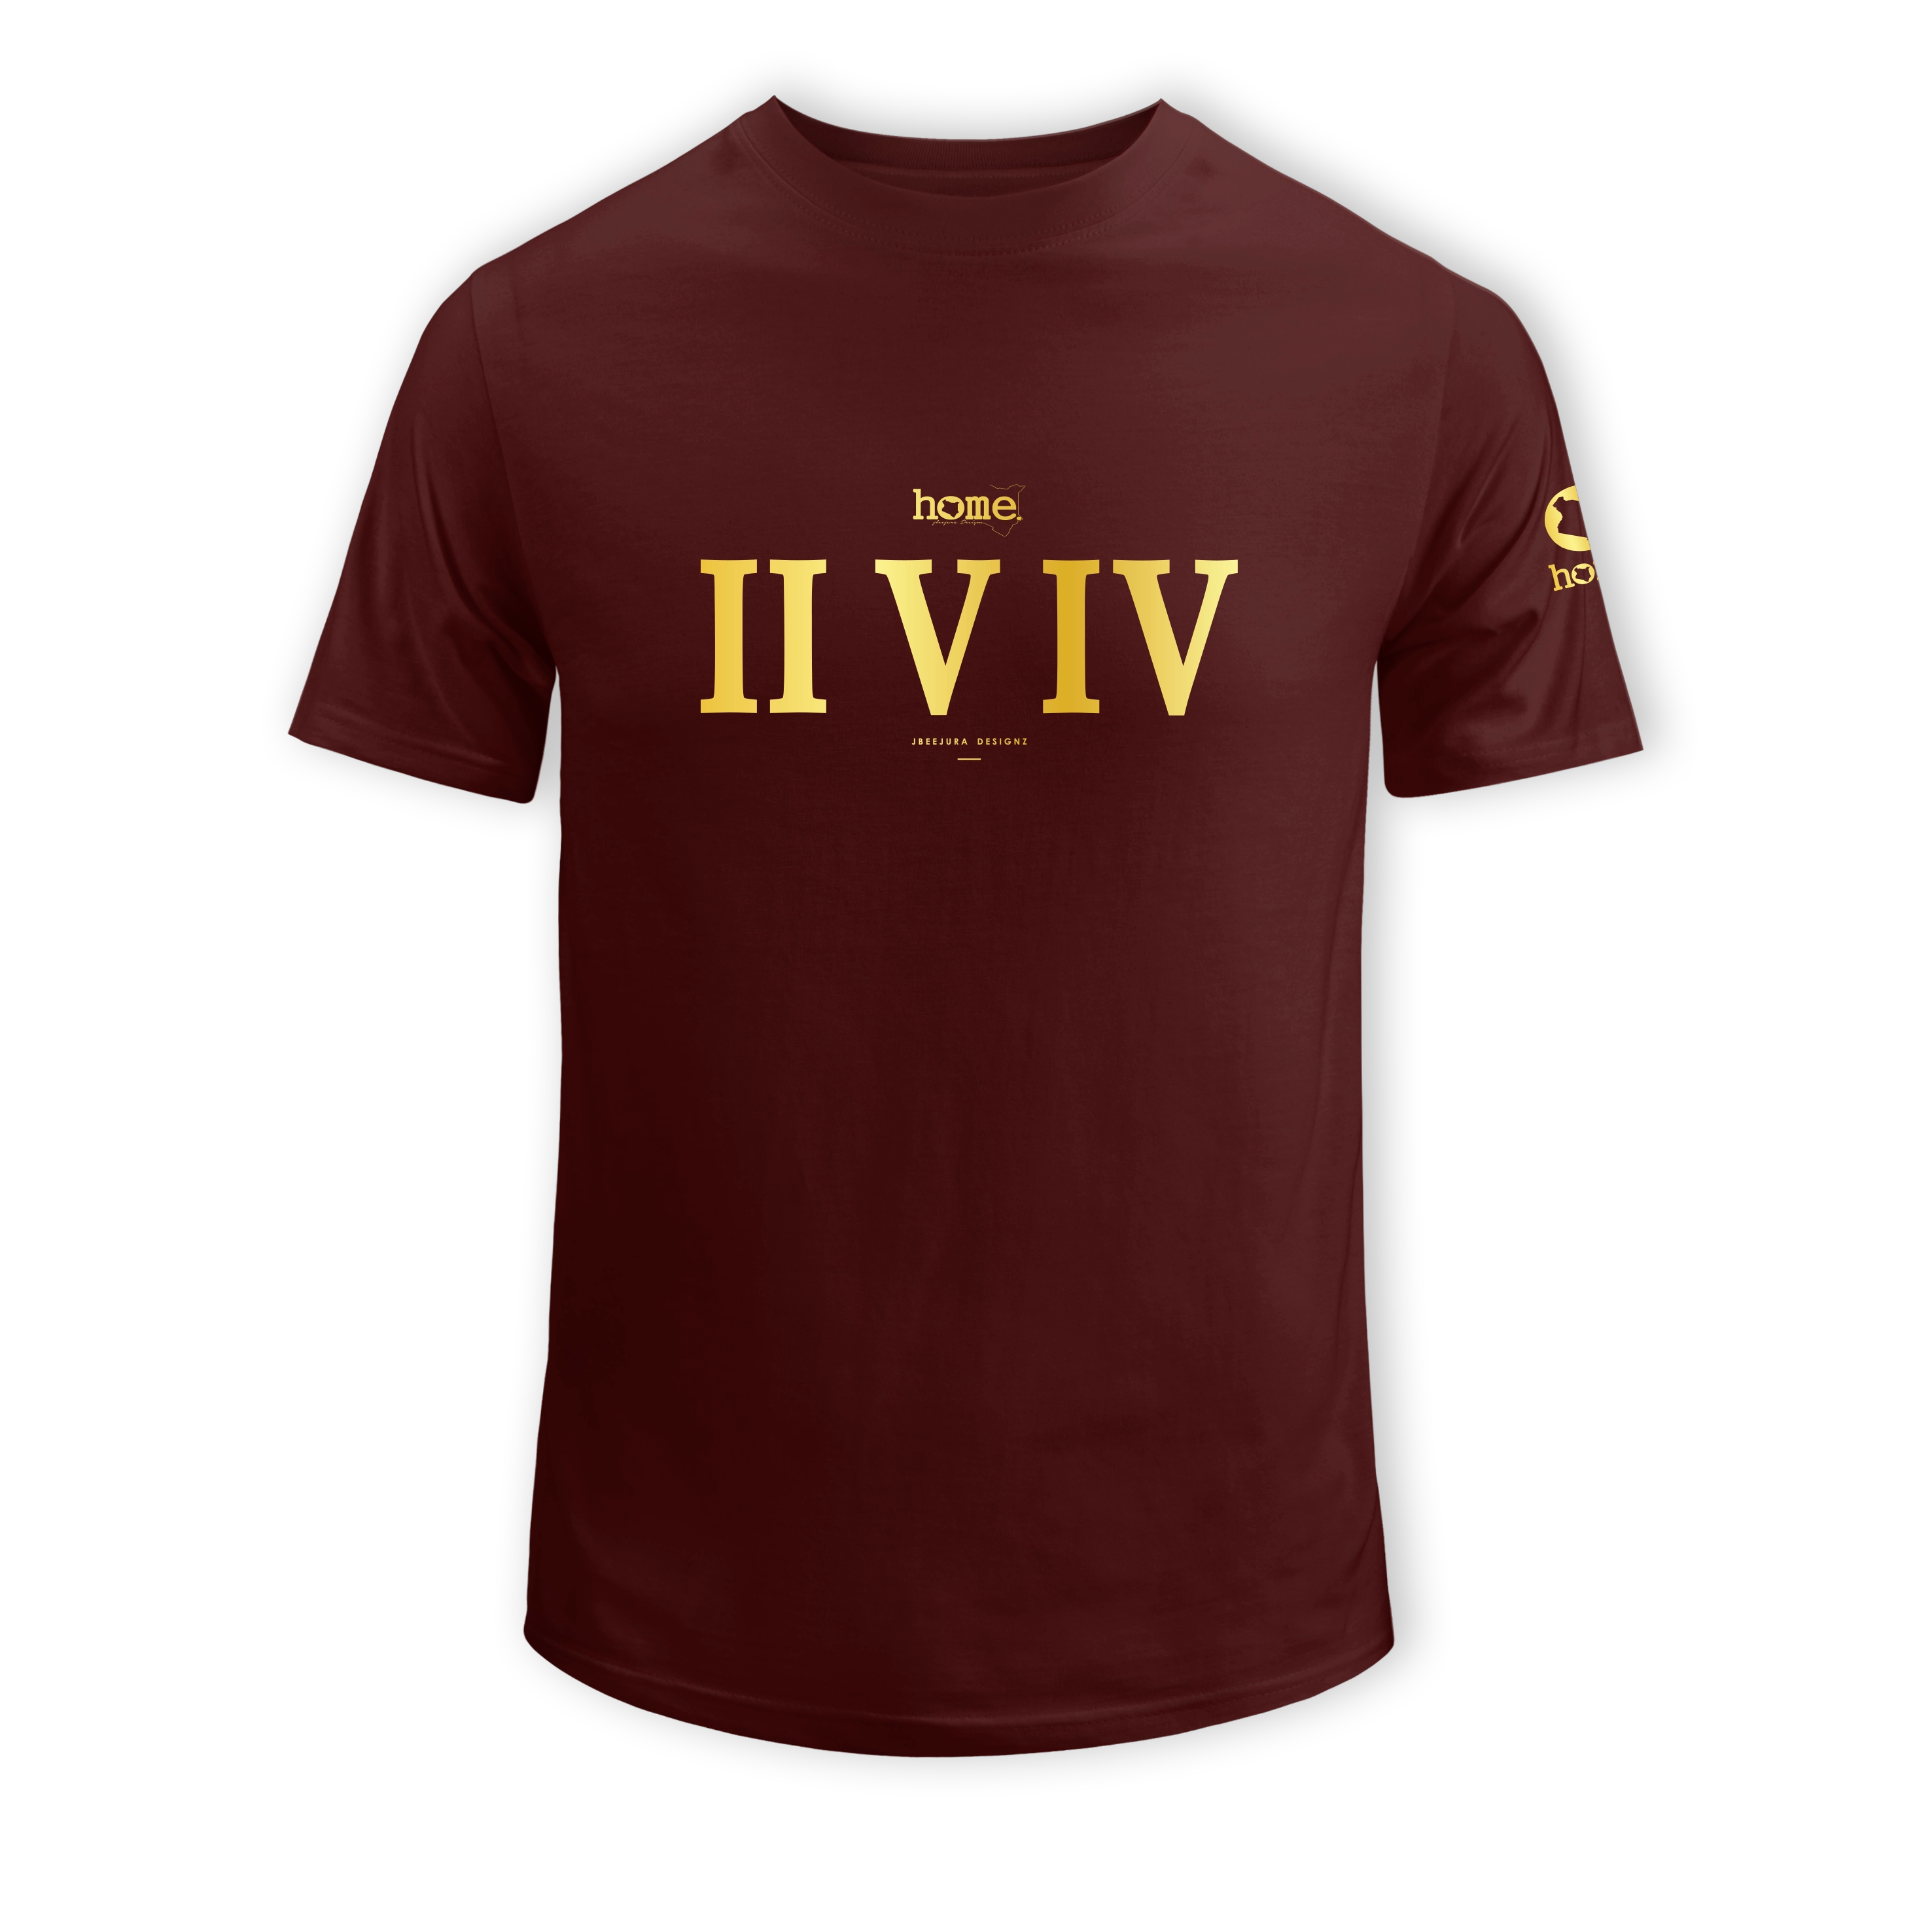 home_254 SHORT-SLEEVED MAROON T-SHIRT WITH A GOLD ROMAN NUMERALS PRINT – COTTON PLUS FABRIC